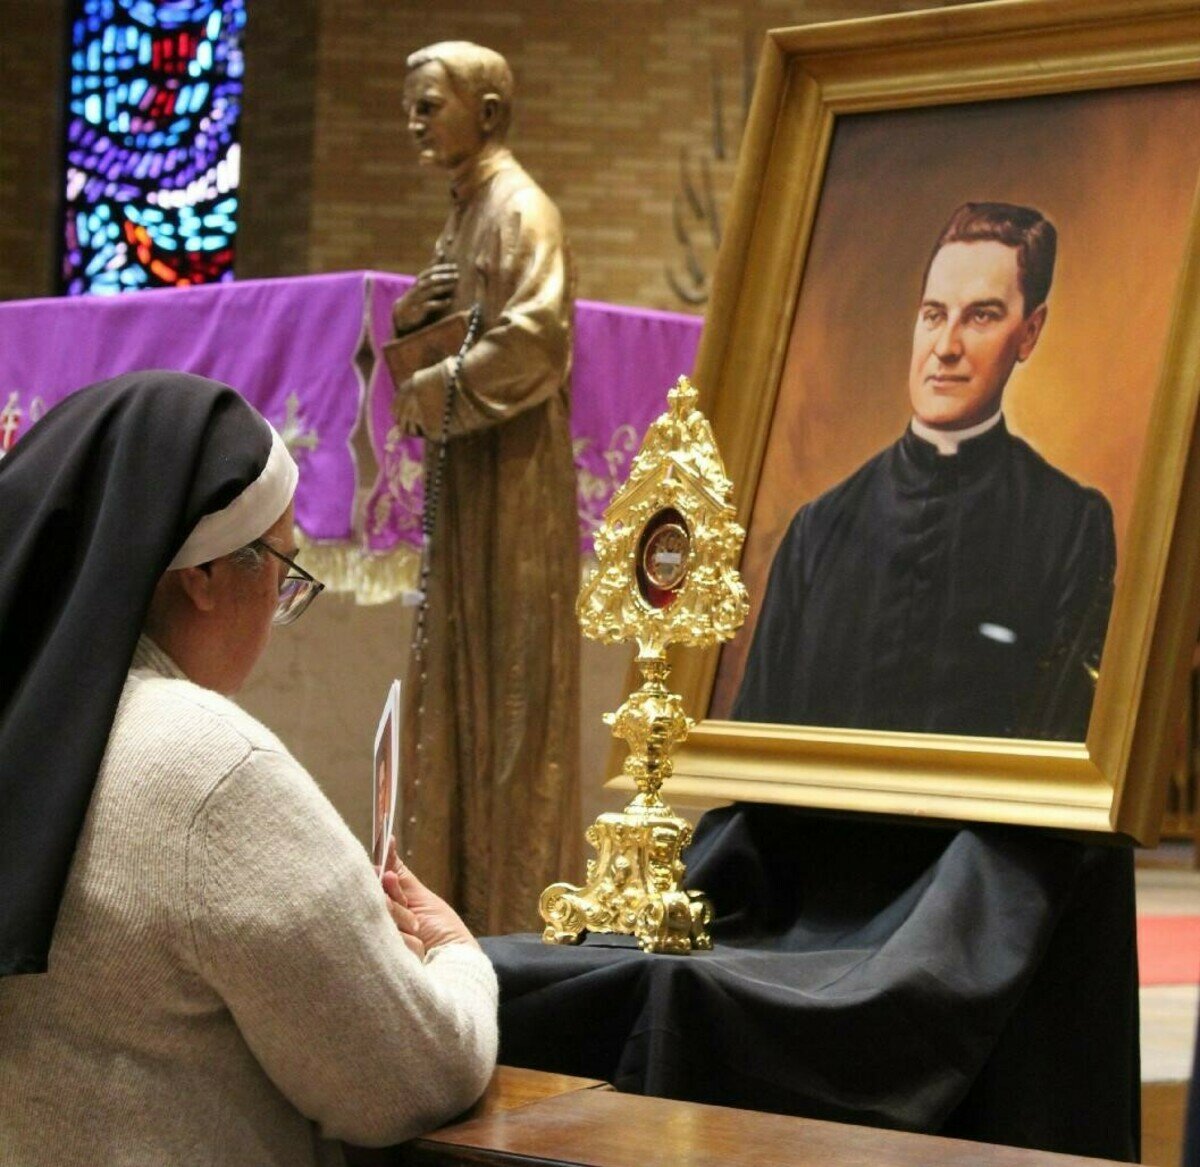 knights-of-columbus-pilgrimage-of-blessed-mcgivney-relic-visits-three